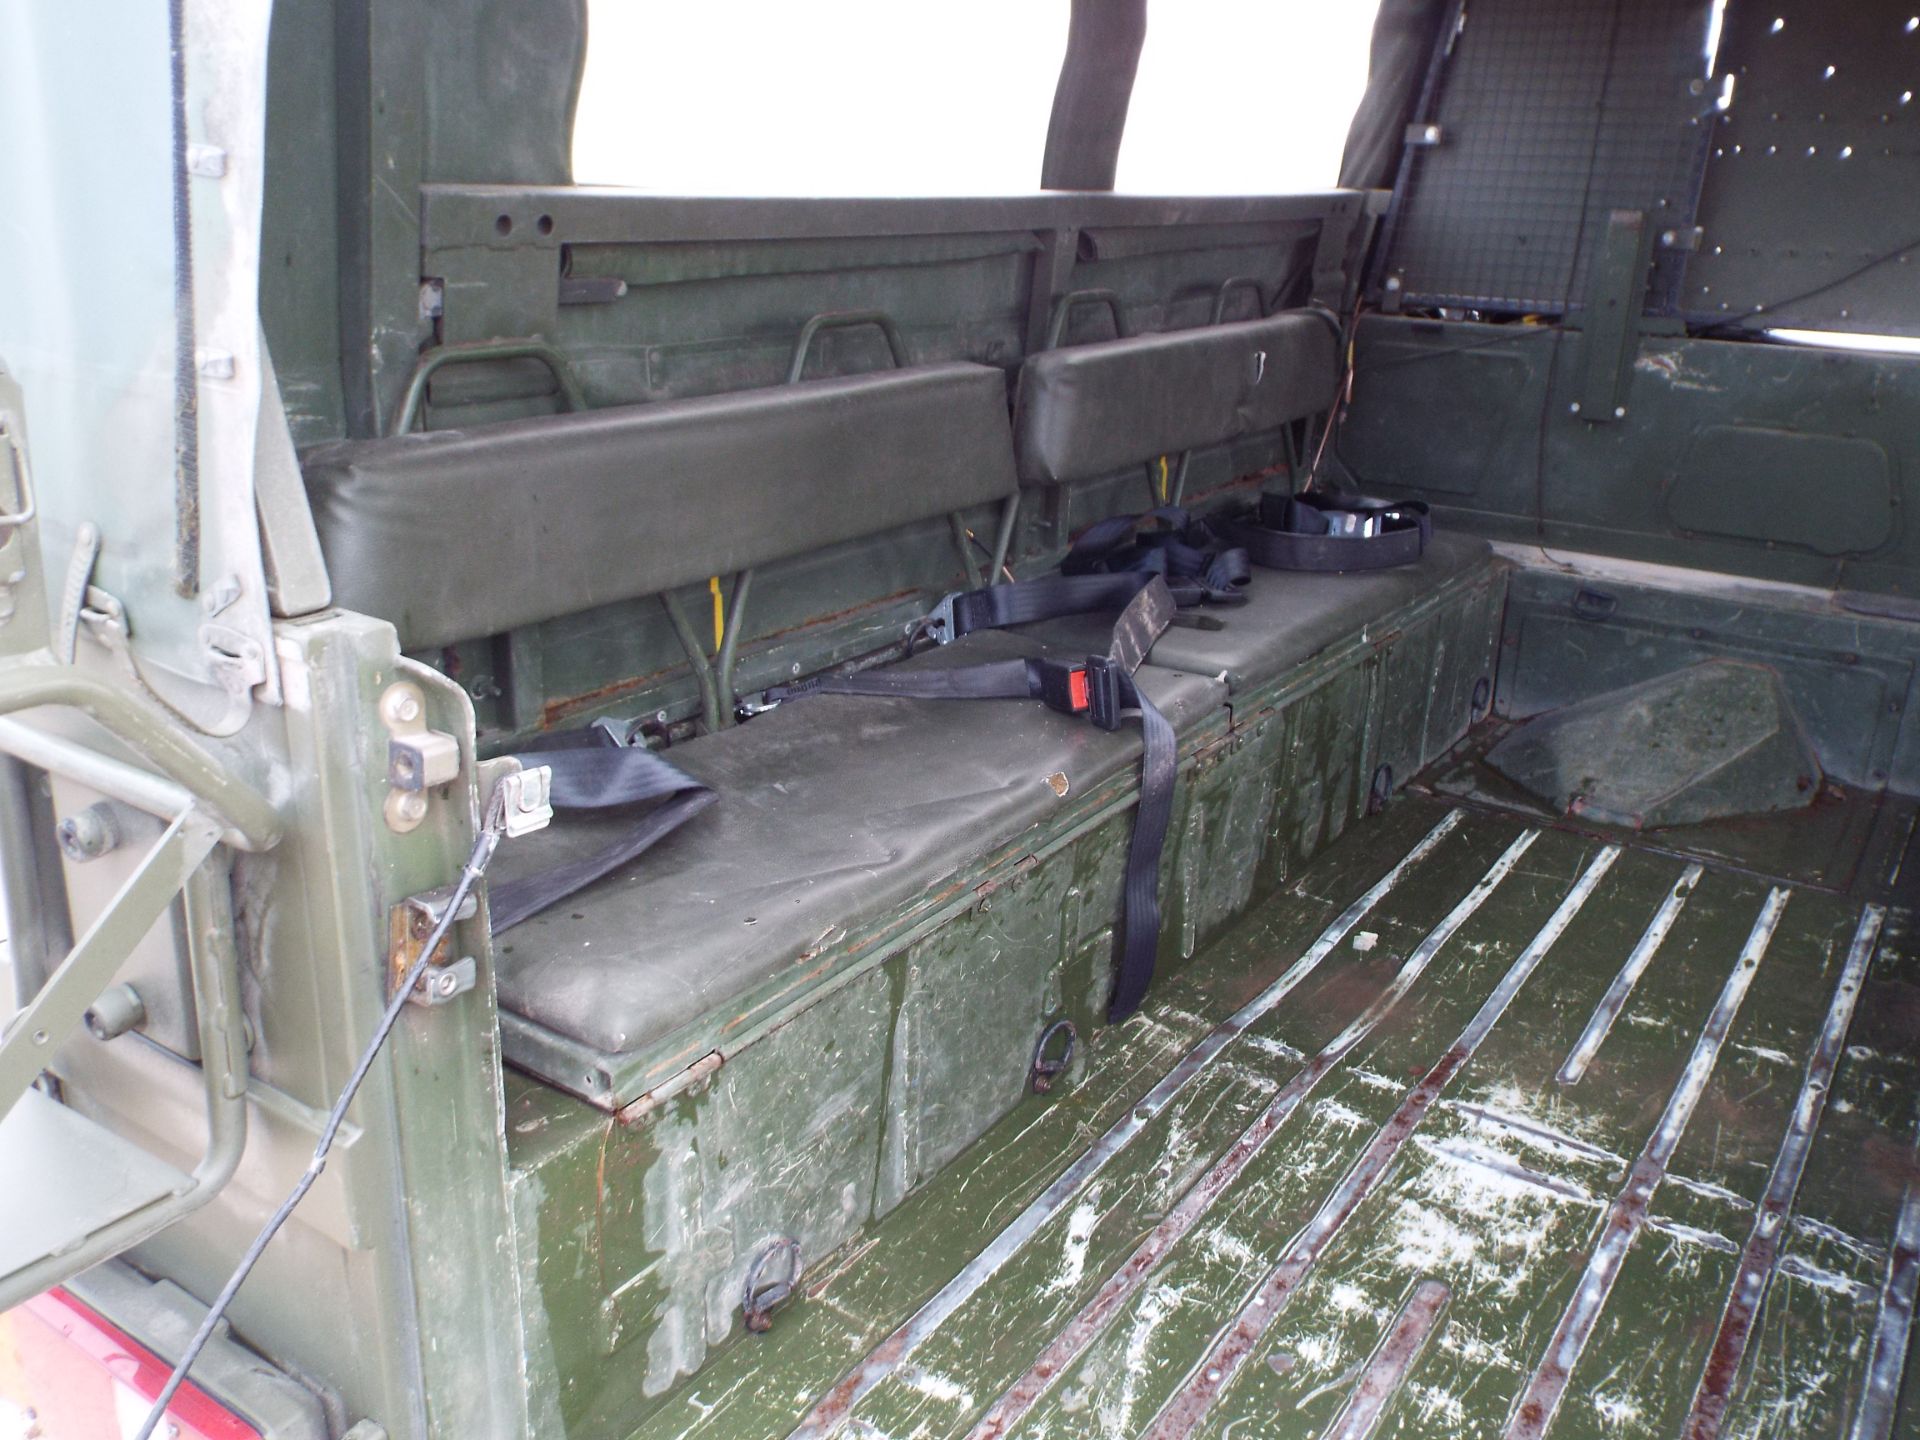 Military Specification Pinzgauer 4X4 Soft Top - Image 15 of 25